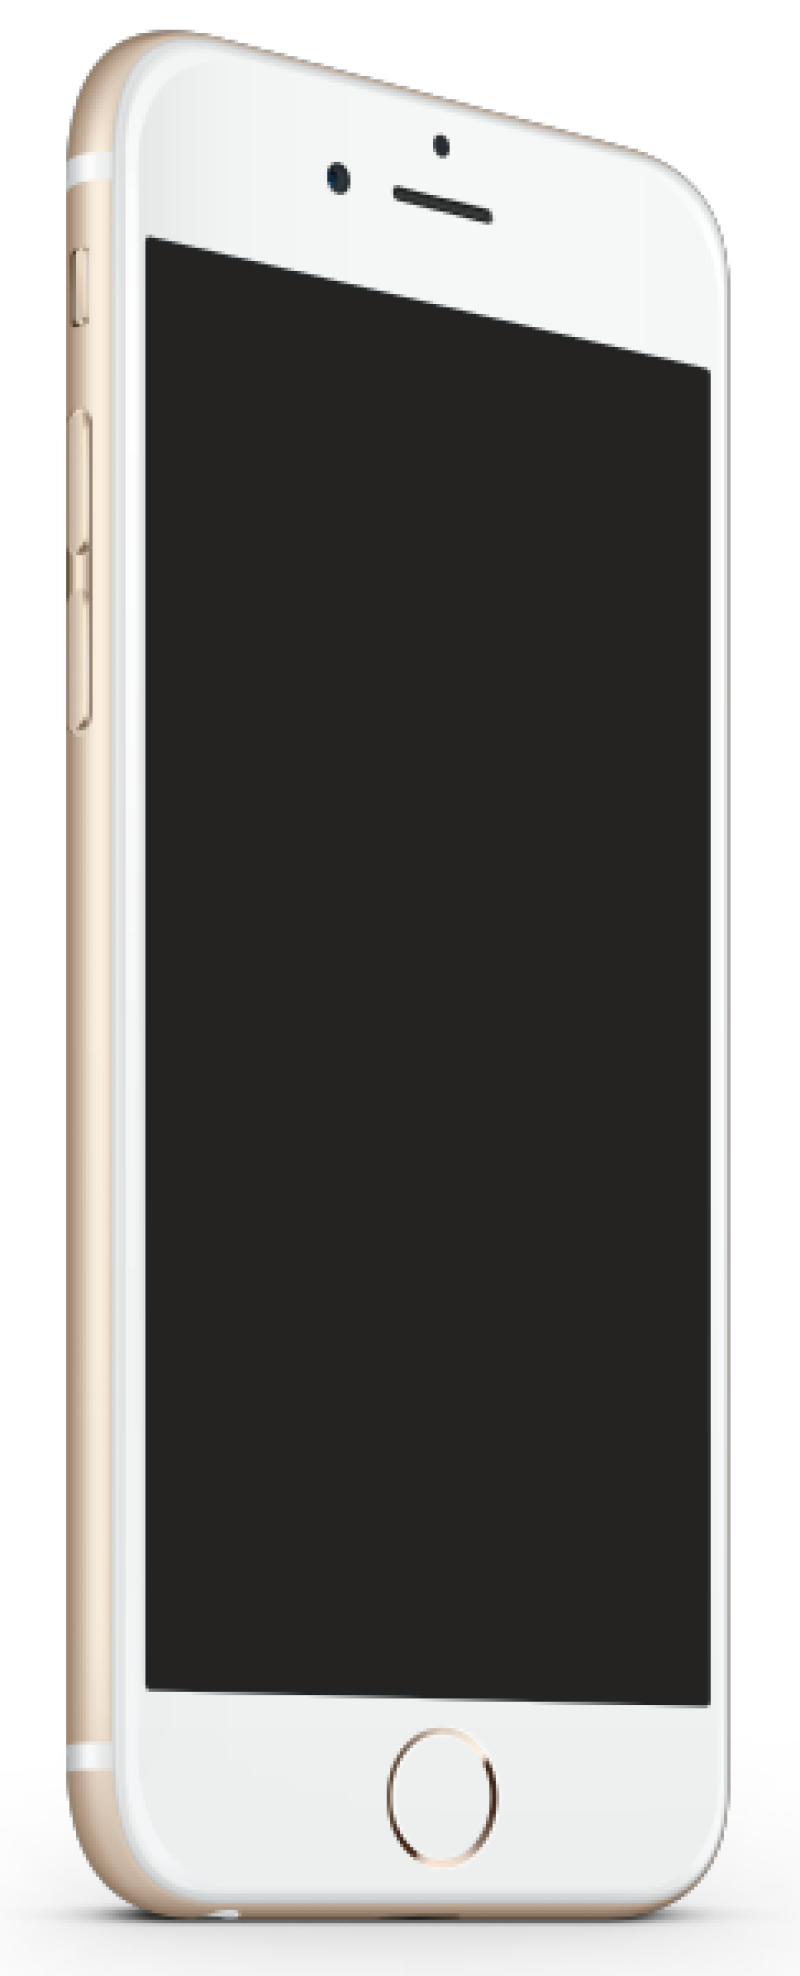 Apple's current flagship, the iPhone 6